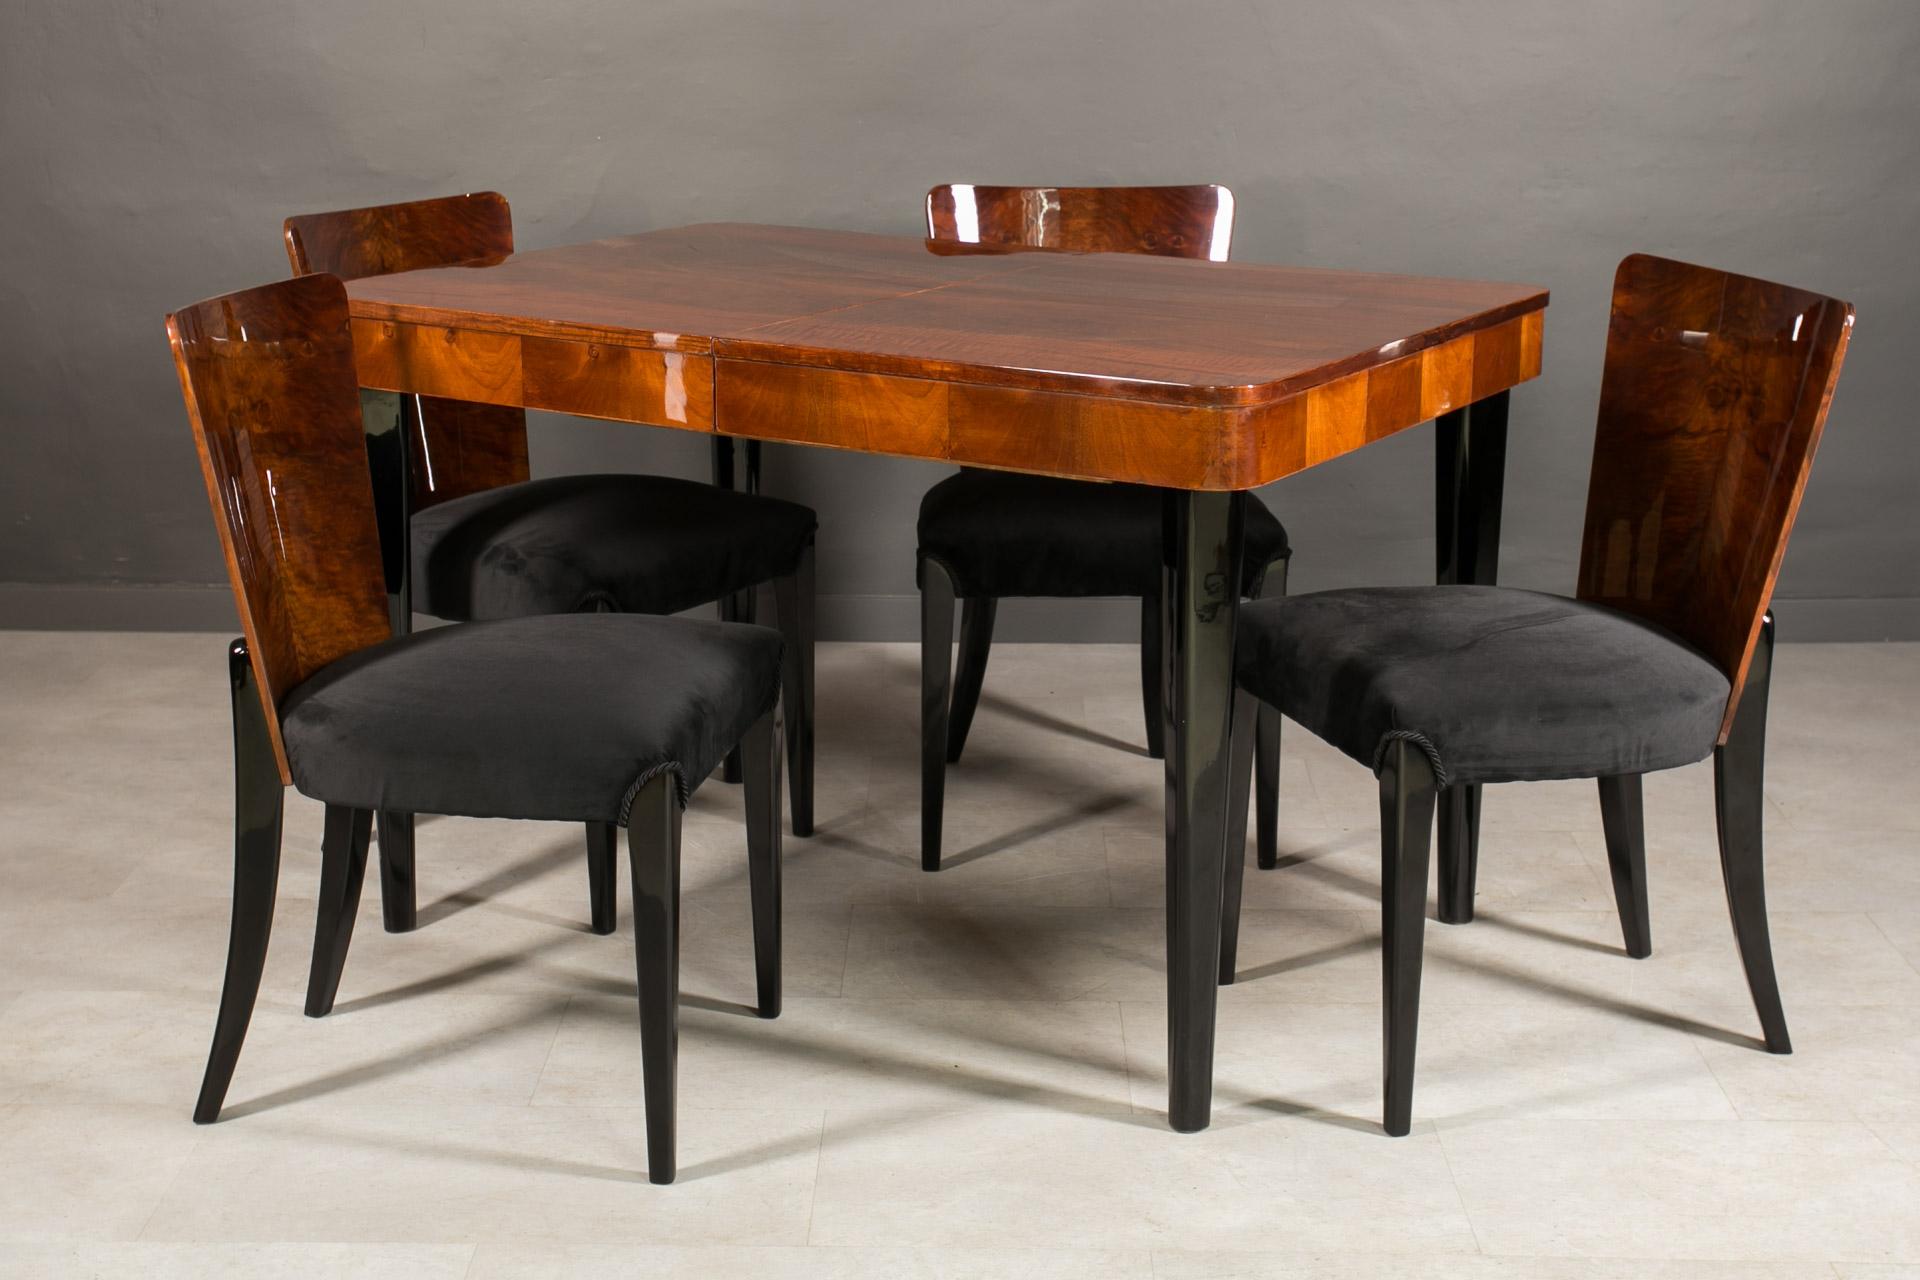 Czech Art Deco Dining Set by J. Halabala, Extendable Table in Walnut, 4 Chairs For Sale